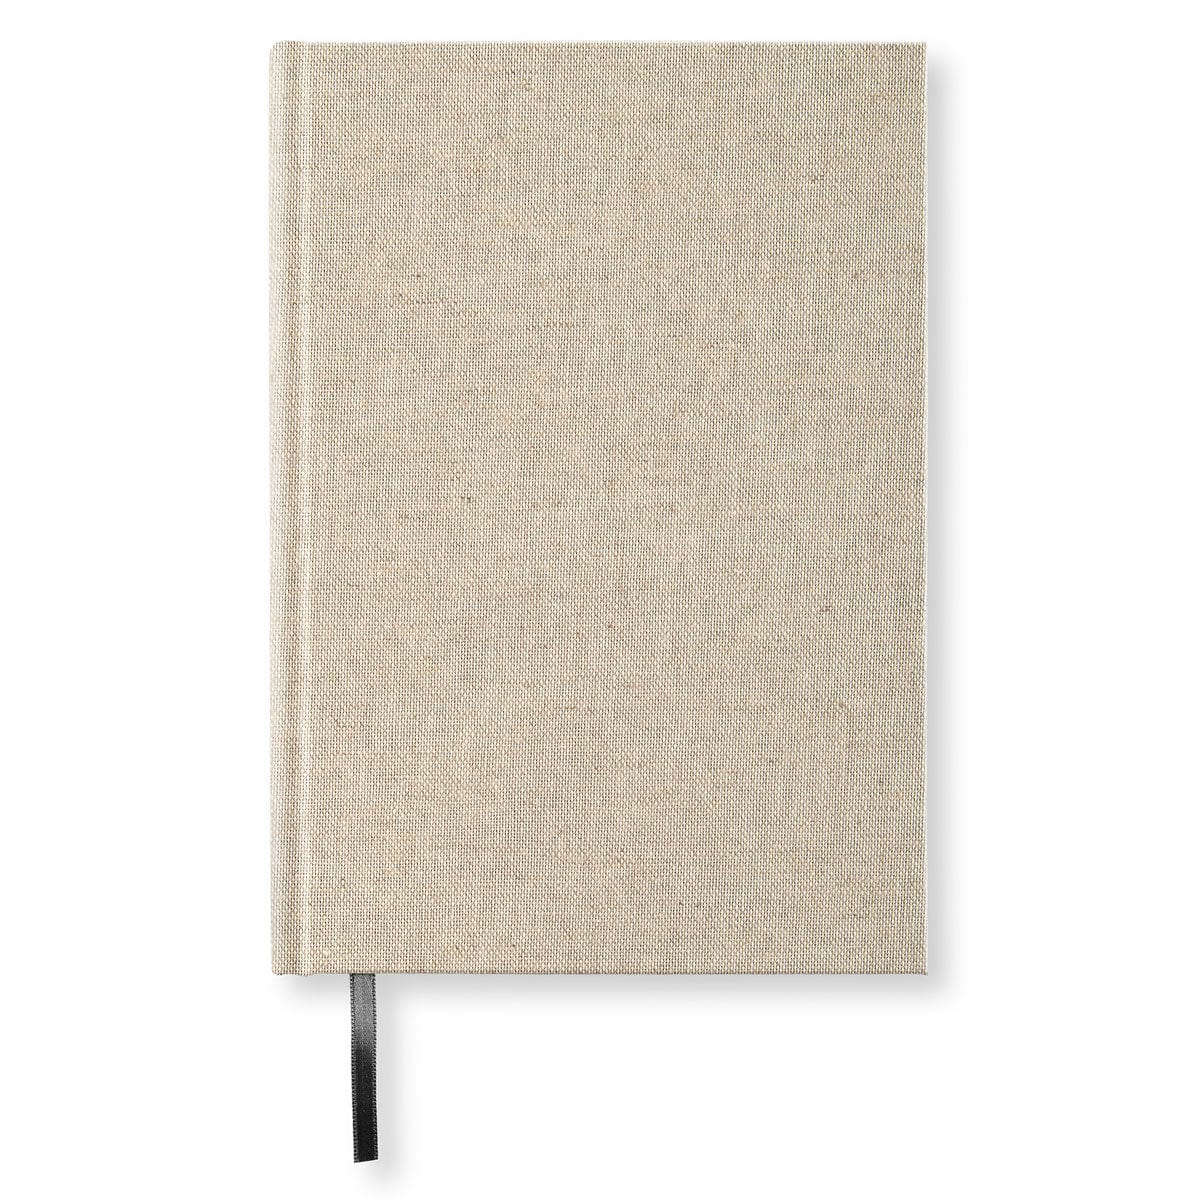 PaperStyle Paperstyle NOTEBOOK A5 128p. Ruled Rough Linen